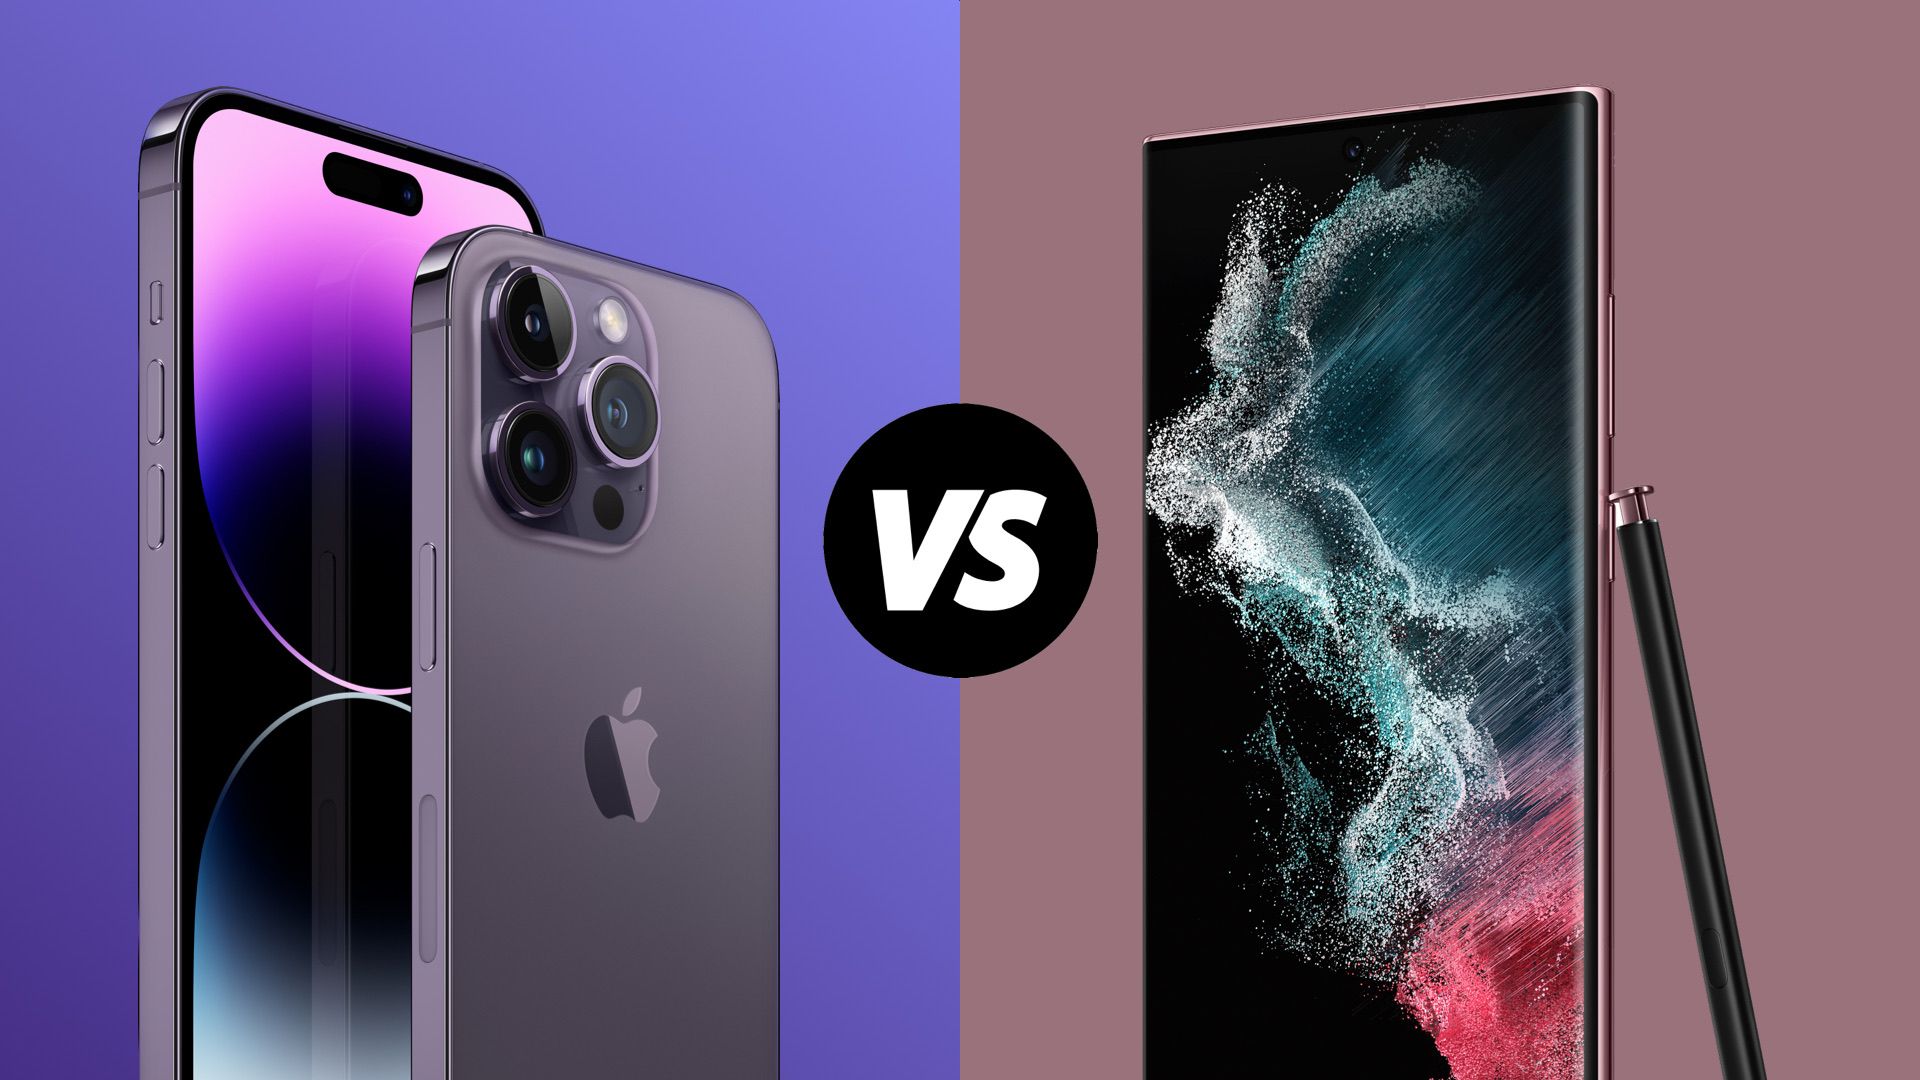 iPhone 14 Pro Max vs Samsung Galaxy S22 Ultra: Which should you buy?